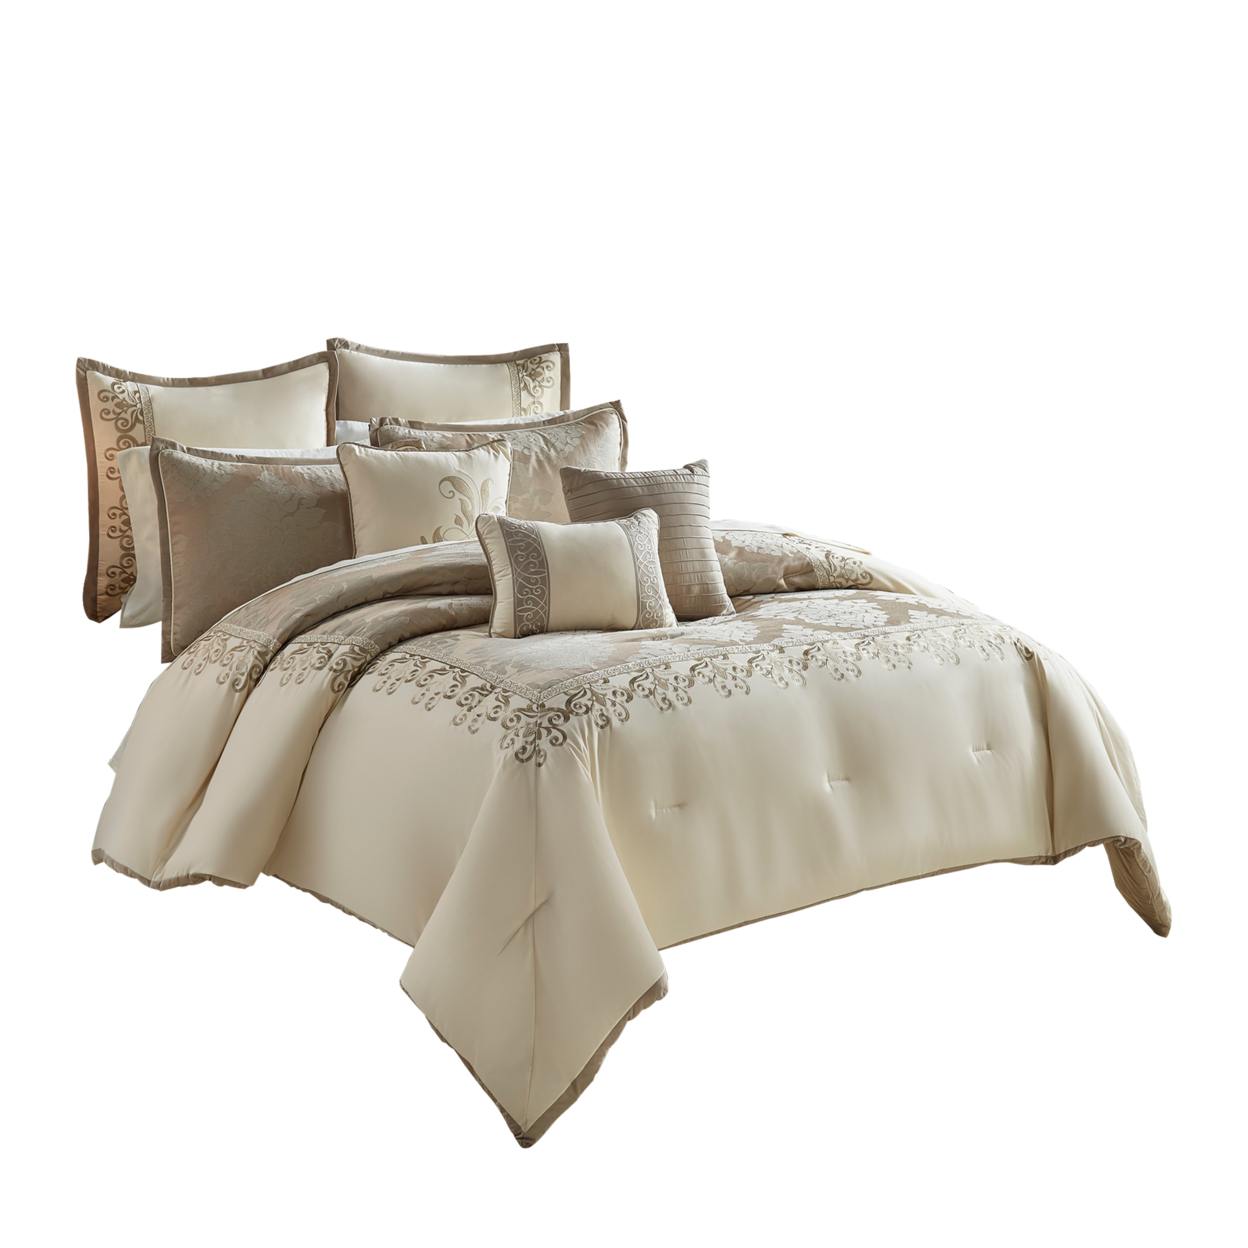 9 Piece Queen Polyester Comforter Set With Damask Print, Cream And Gold- Saltoro Sherpi